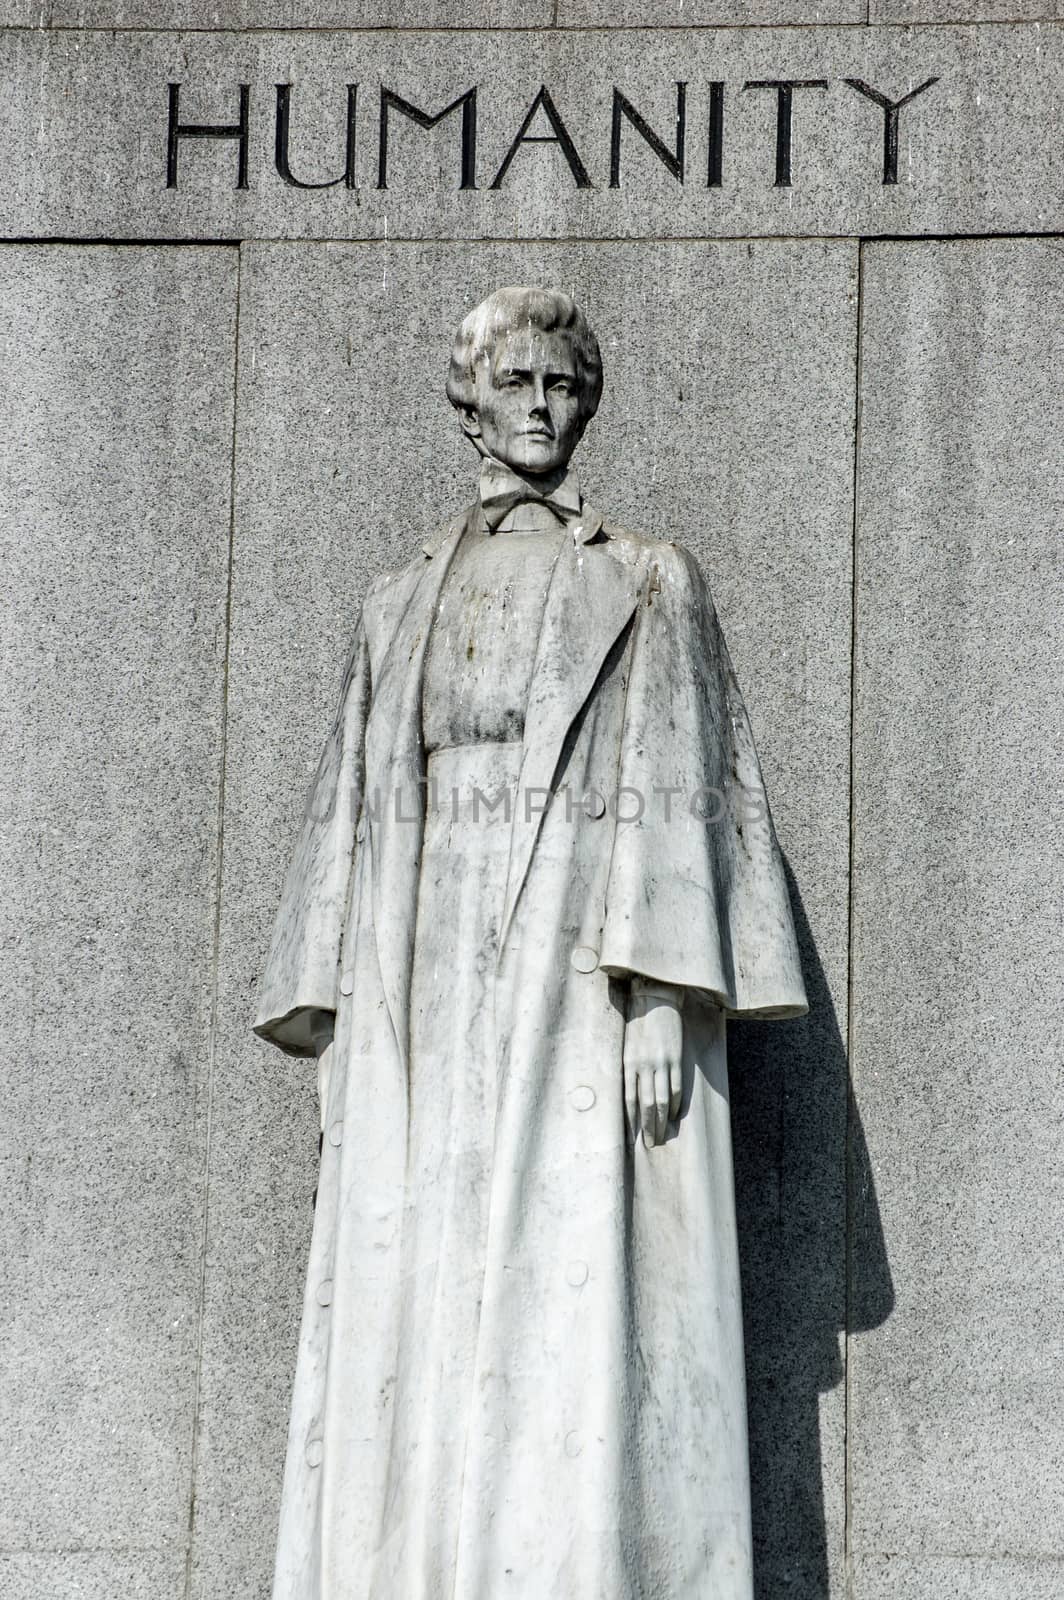 Statue commemorating the nurse and heroine Edith Cavell ( 1865 - 1915) who was shot by a German firing squad for treason in World War I.  Public monument on display over 75 years.